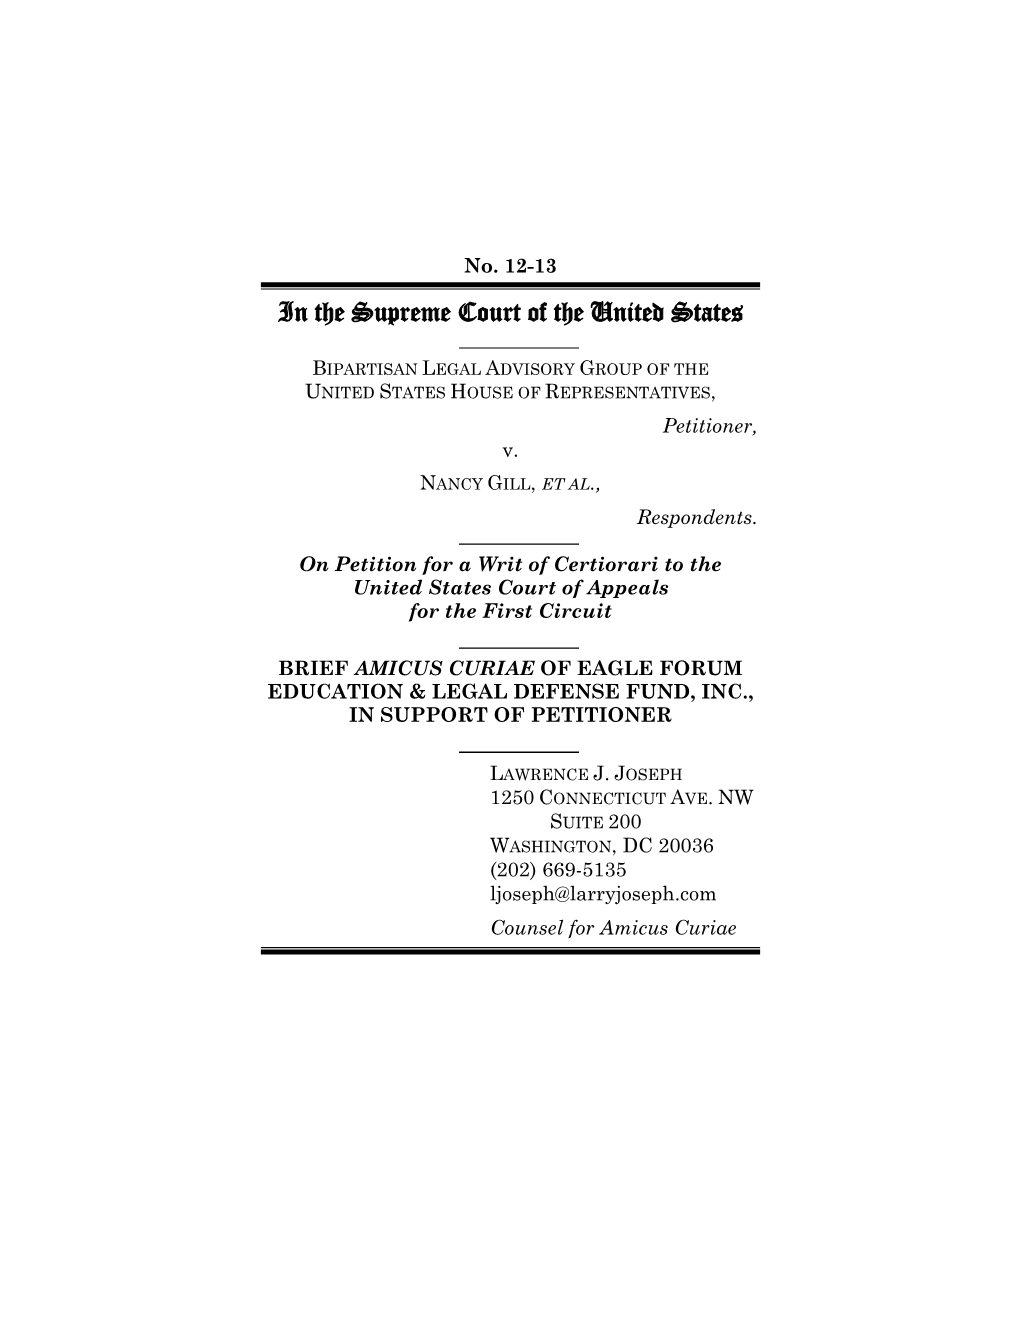 Eagle Forum Amicus Brief in Support of BLAG's Cert Petition